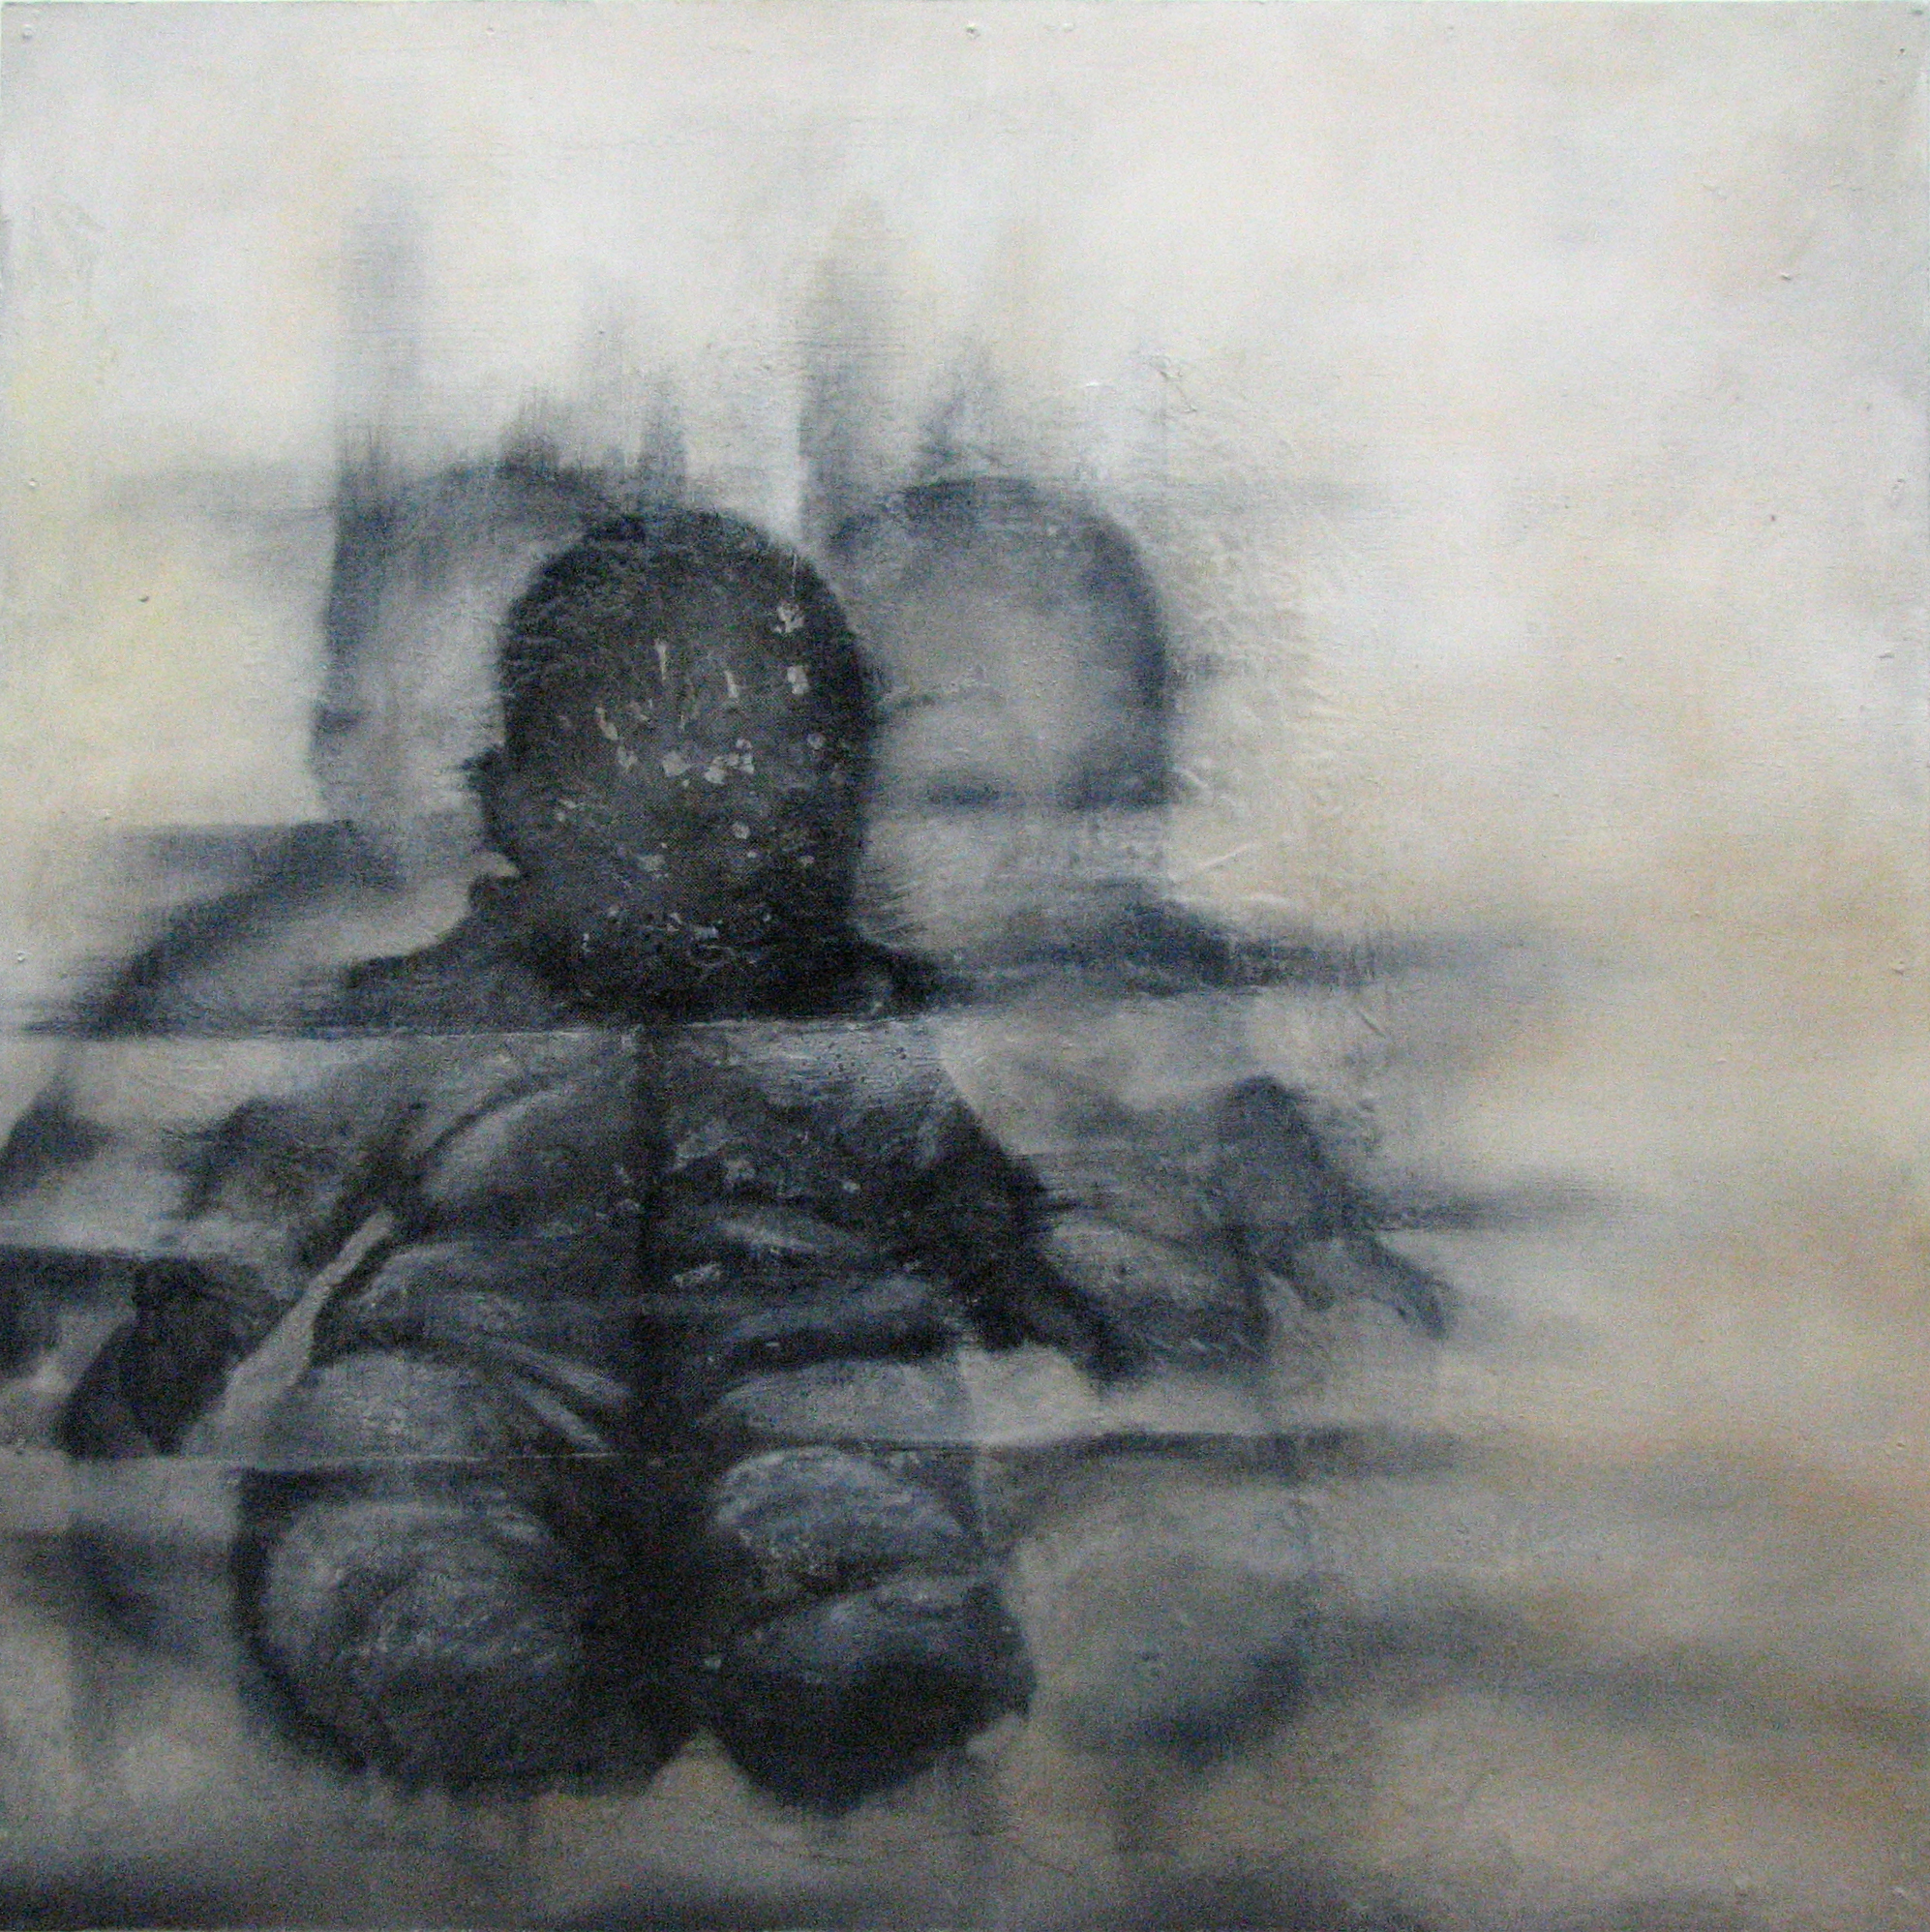  “Self Portrait as Child”  oil and acrylic on wood panel  24” x 24”  2009 